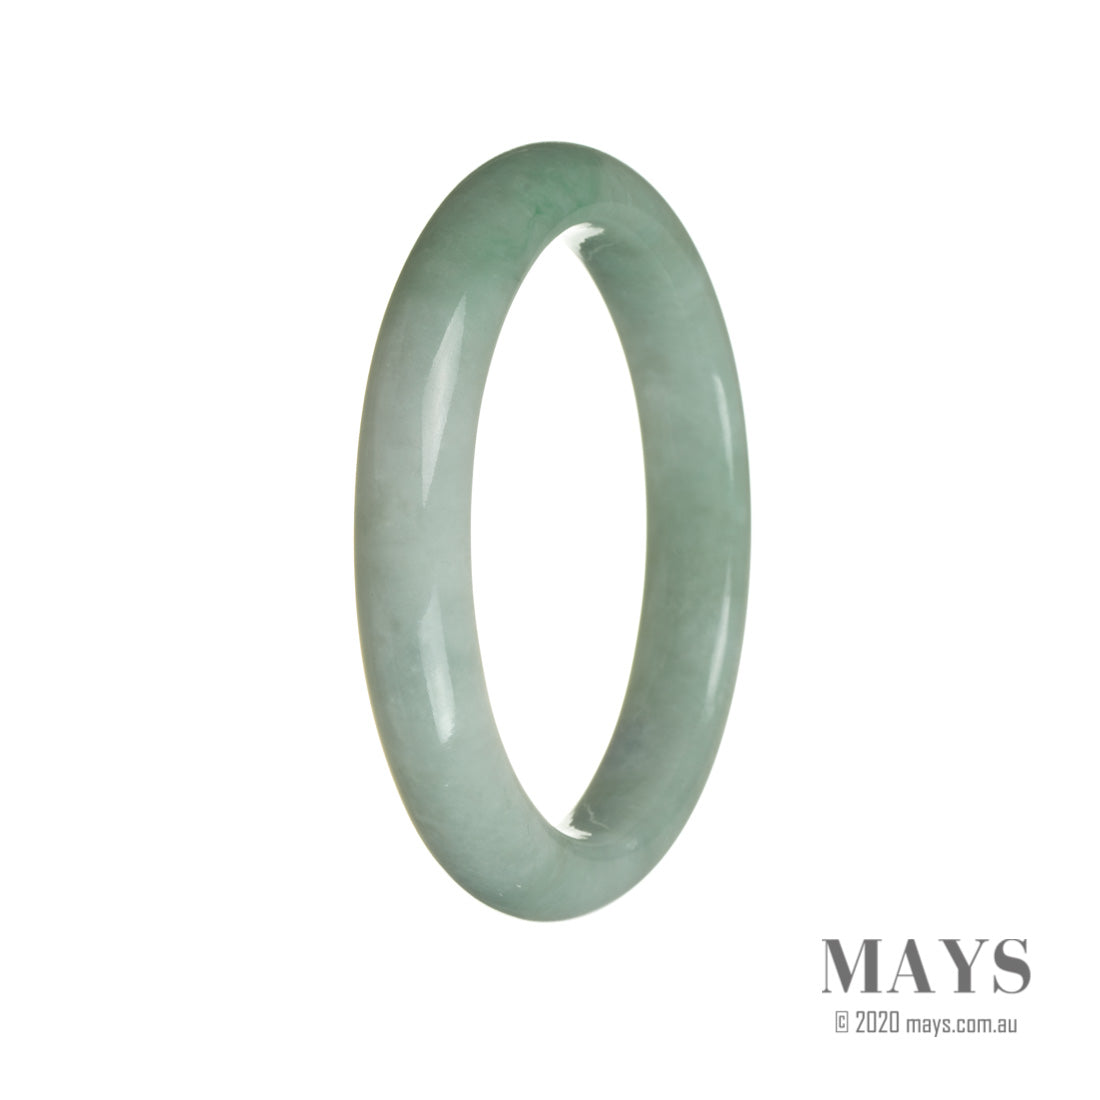 A beautiful green and white Burmese jade bangle bracelet with a semi-round shape, measuring 63mm.